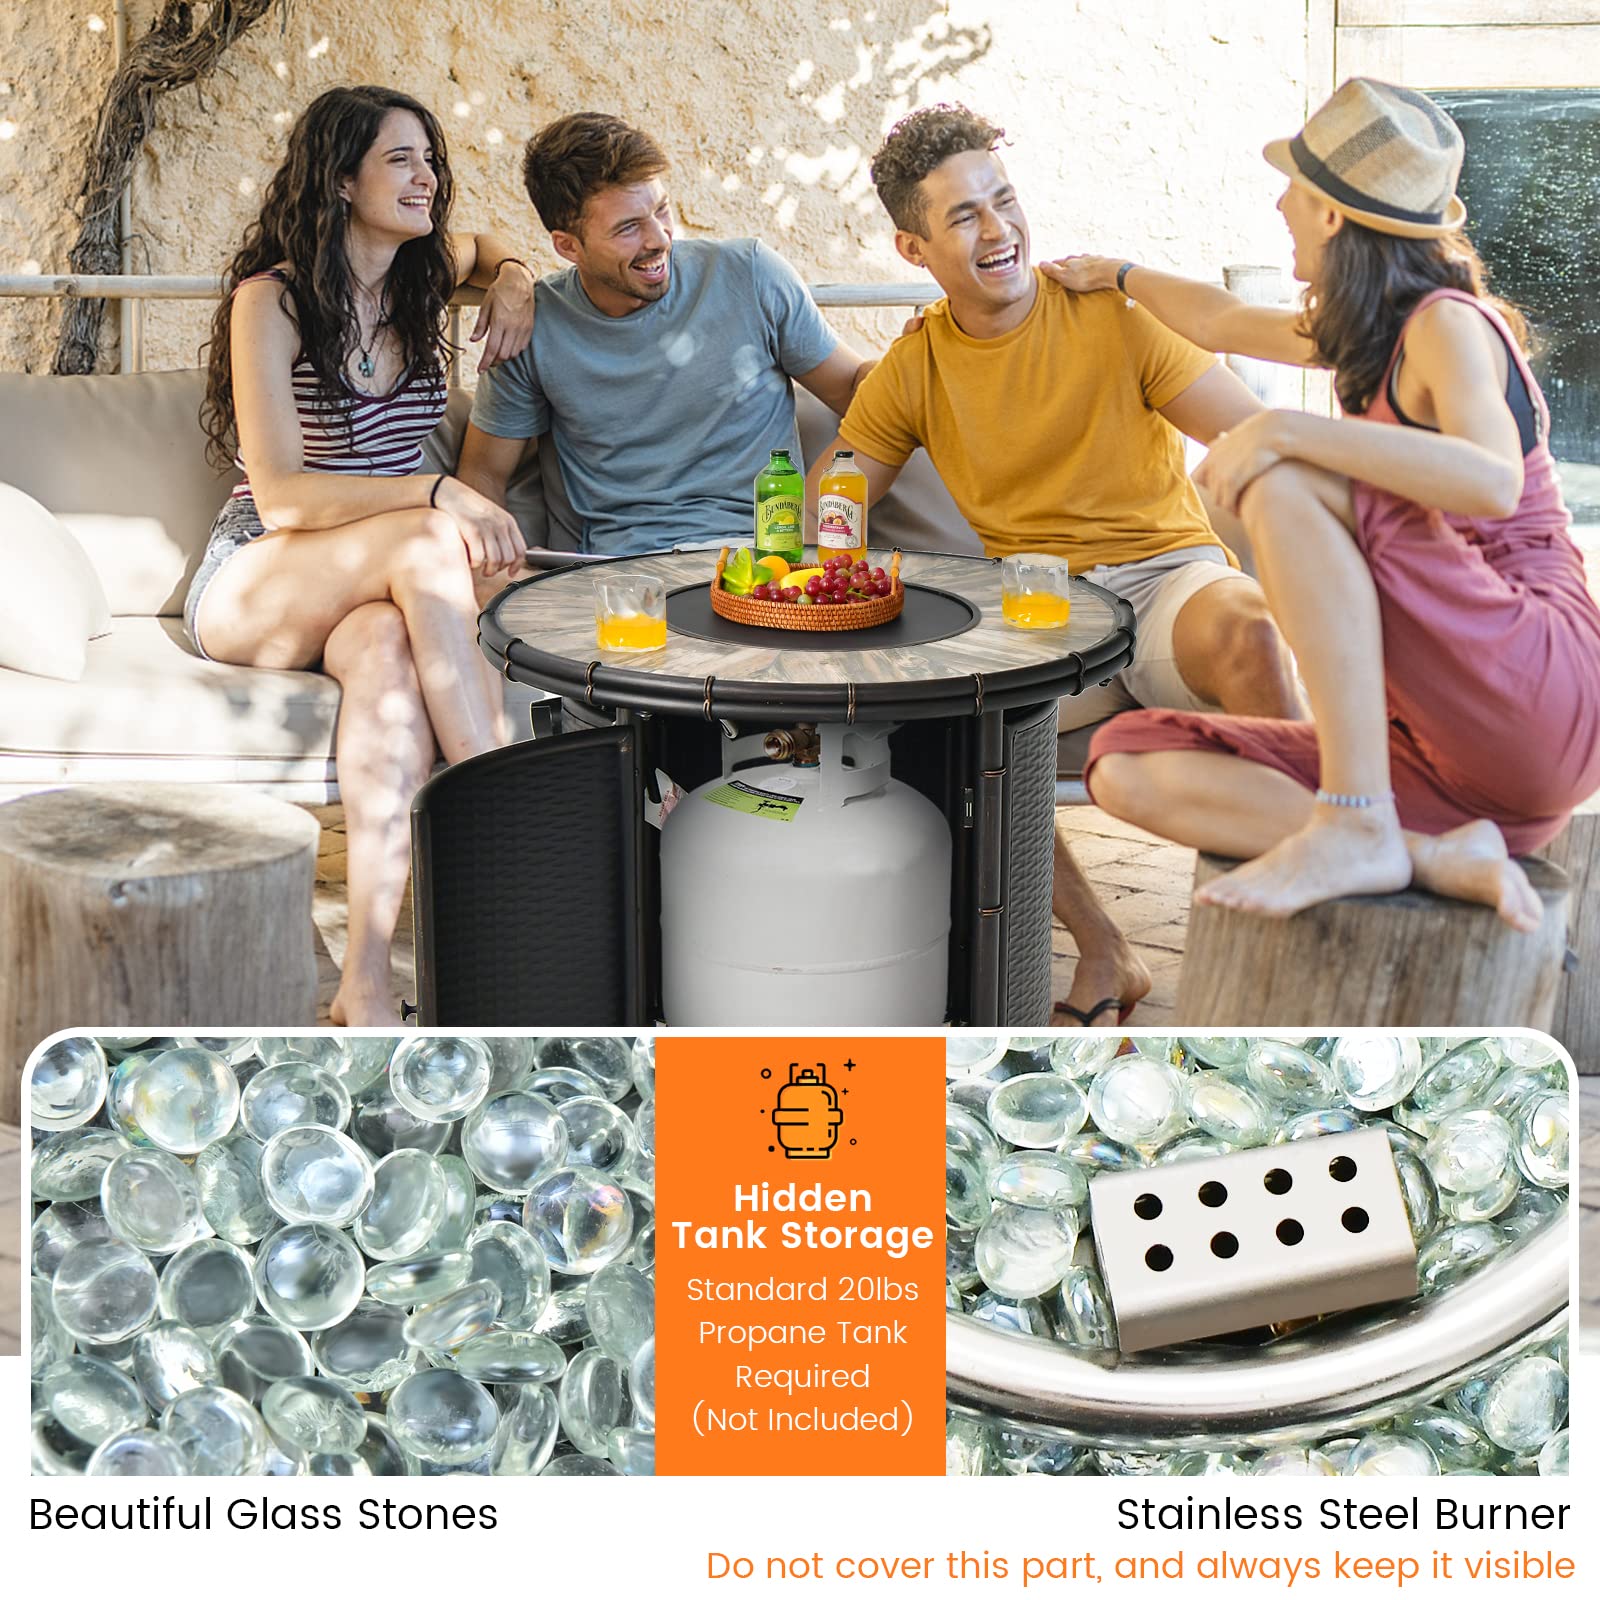 Giantex 33" Outdoor Fire Pit Table - 30,000 BTU Round Metal Fire Table with Lid, PVC Cover, Glass Stones